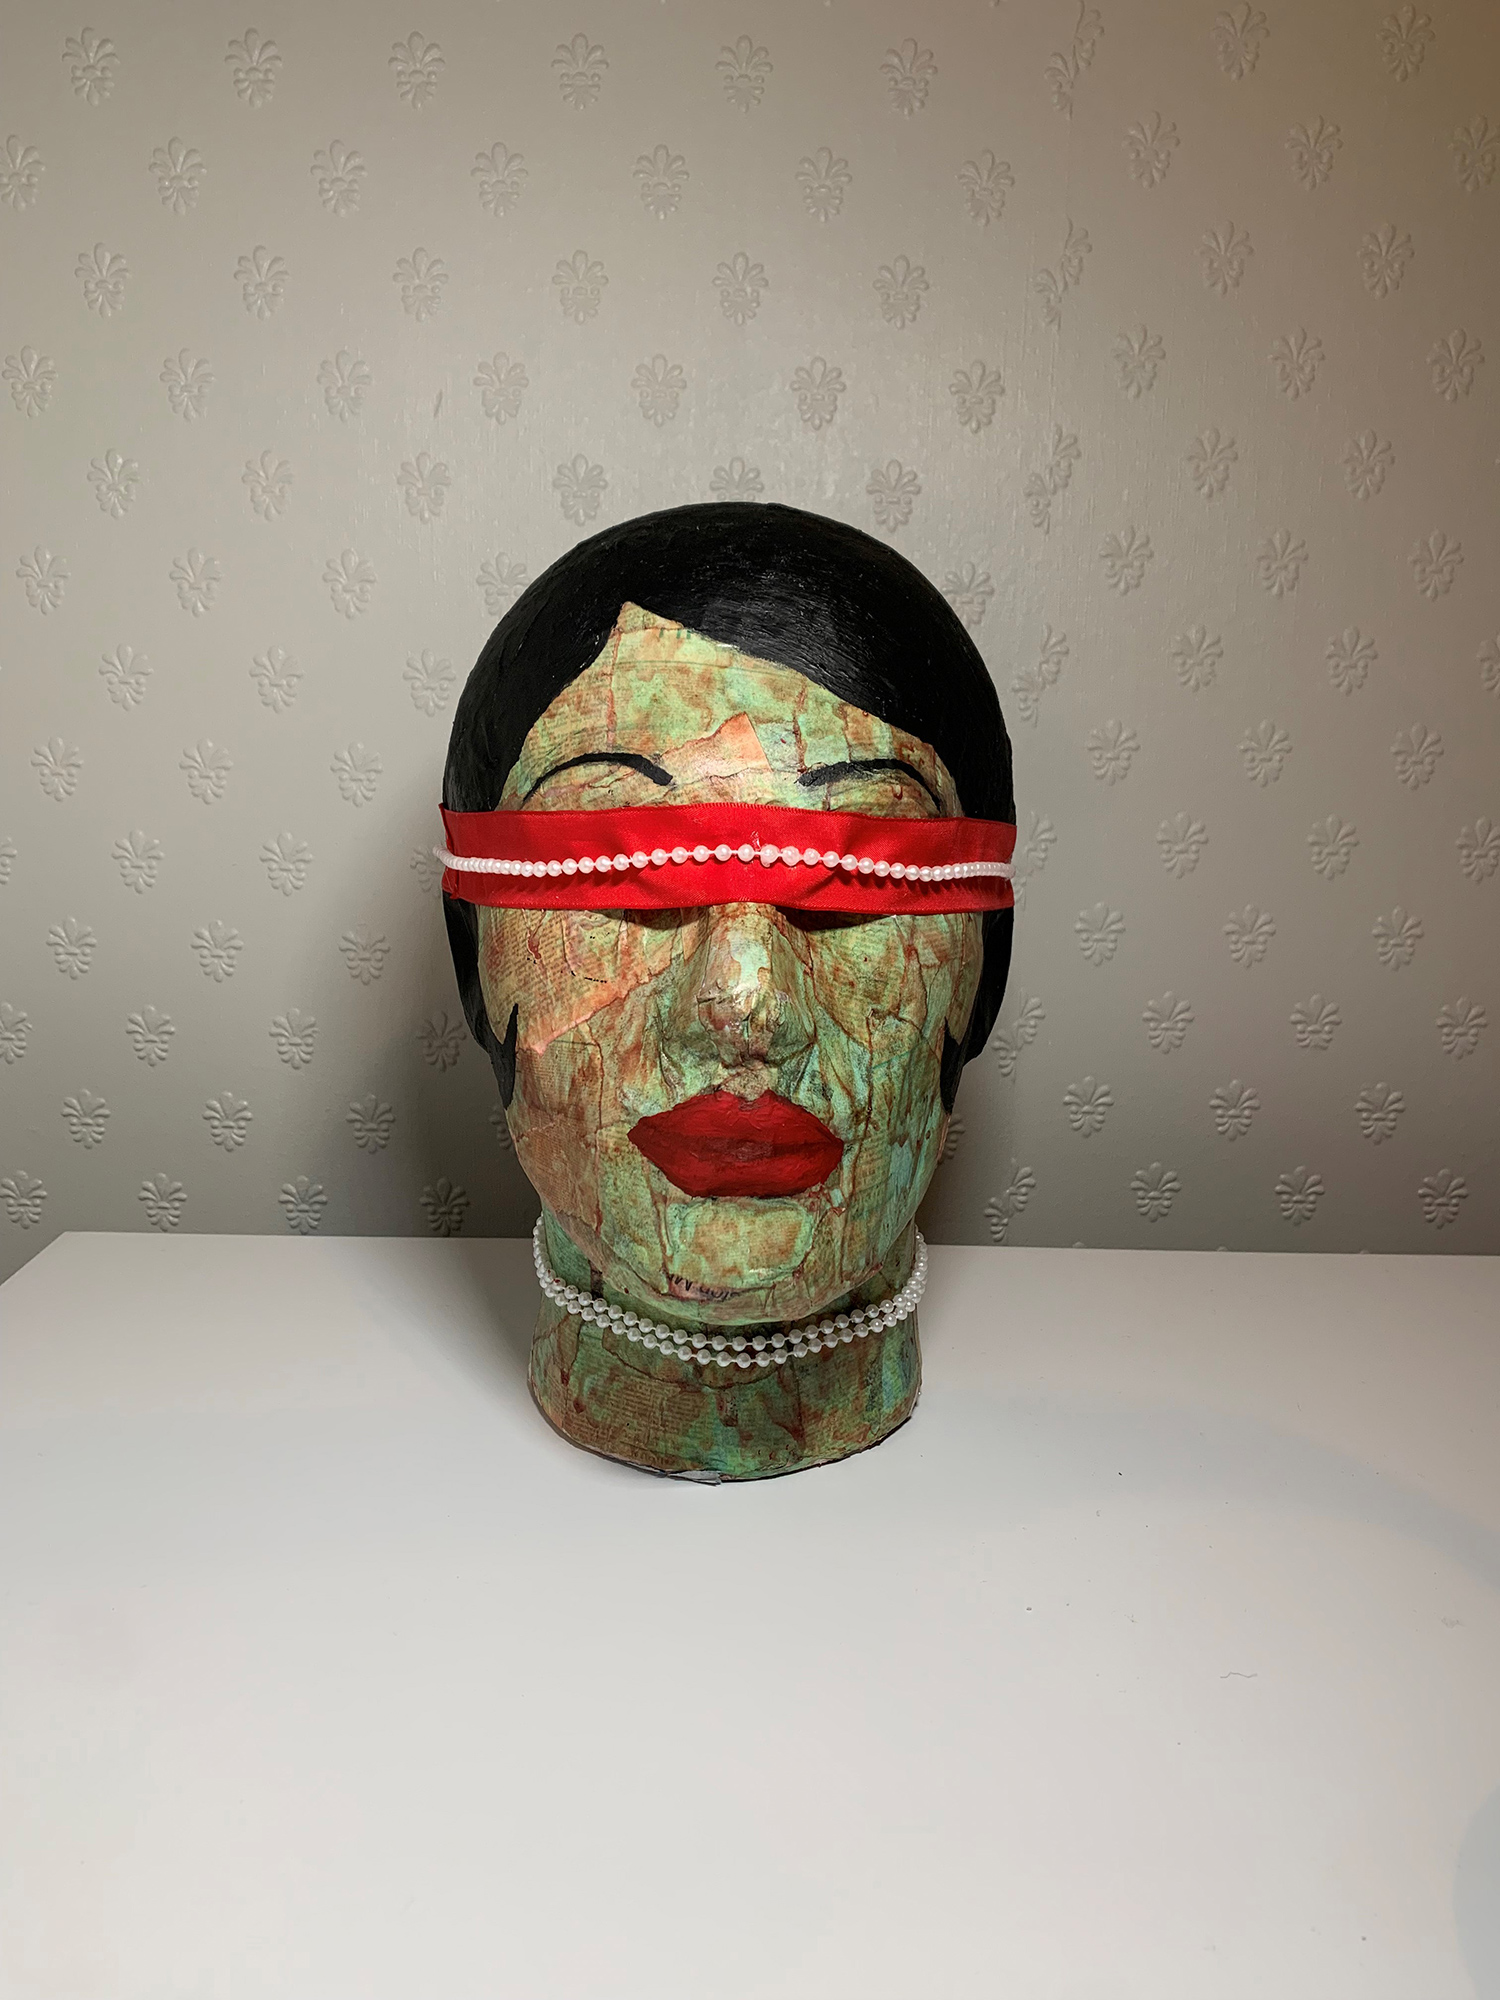 Sculpture of a woman's head. She has short dark hair and red lipstick. She is wearing pearls around her neck and over her eyes.